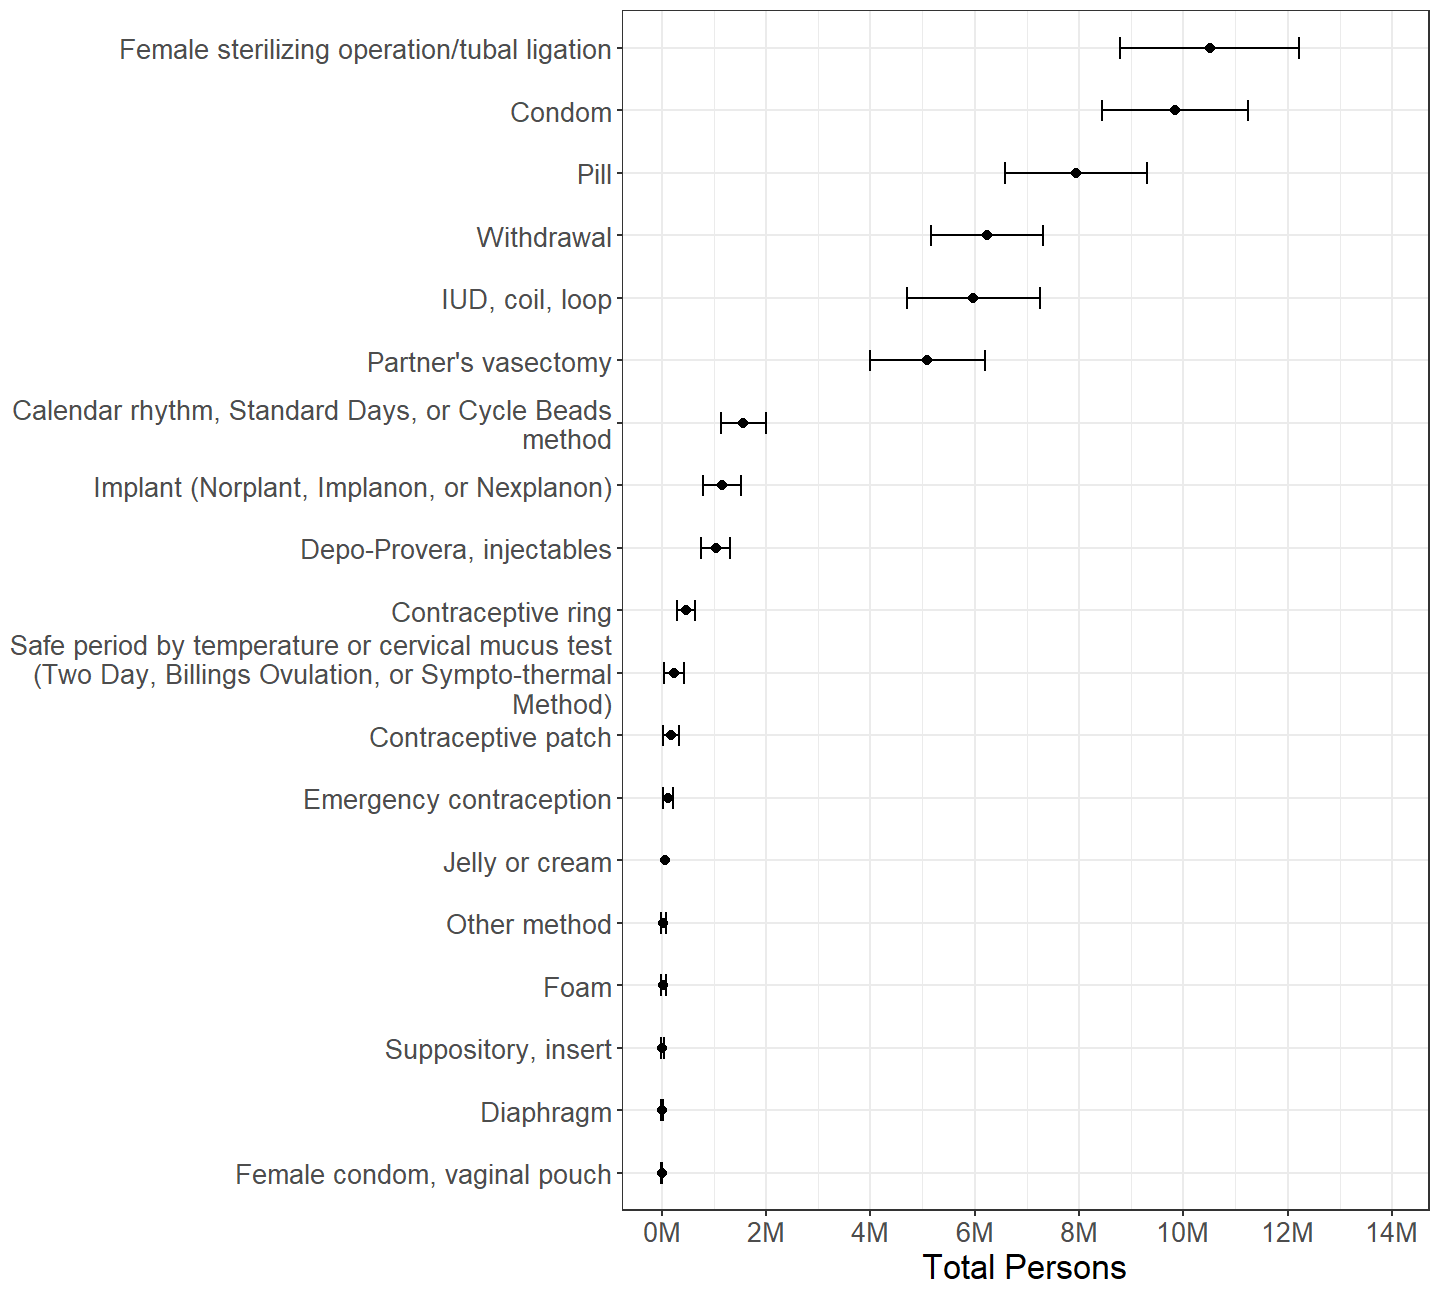 Females categorized by whether or not each contraceptive method was used during last intercourse with a male in the past 3 months, with persons using multiple methods counted multiple times.